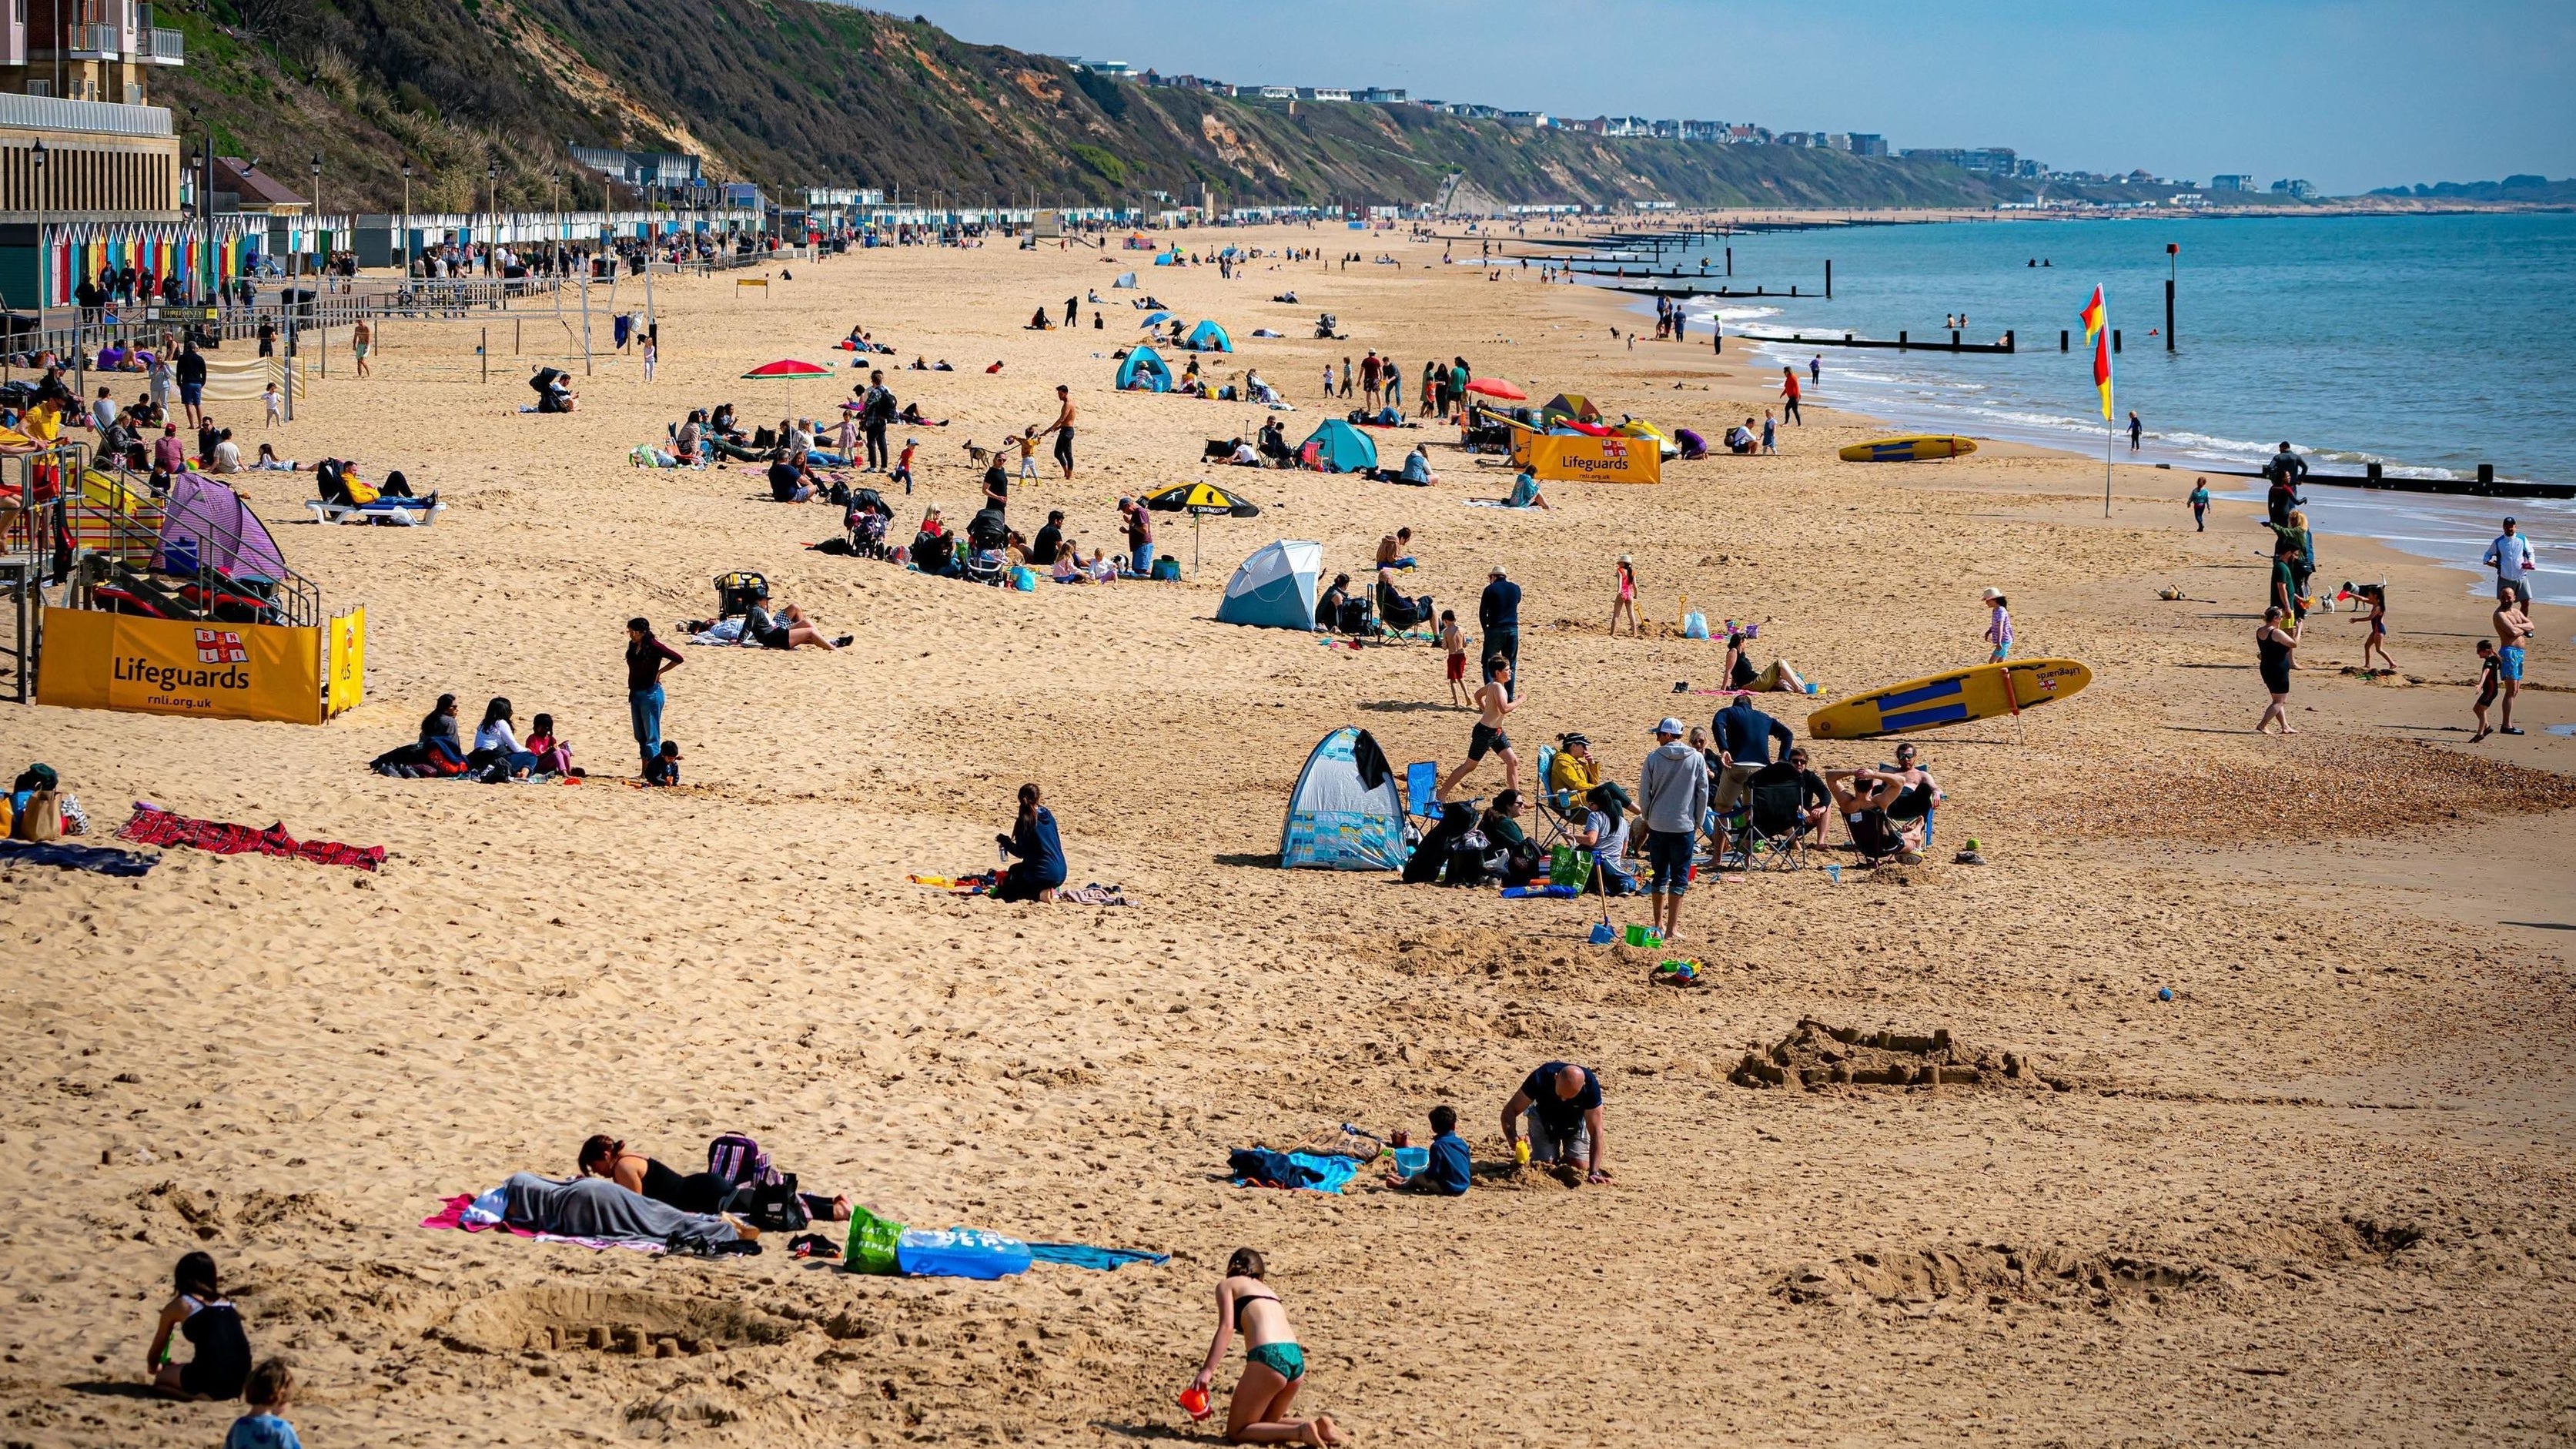 Parts of the UK could get up to 21C on Saturday, one of the hottest days of the year